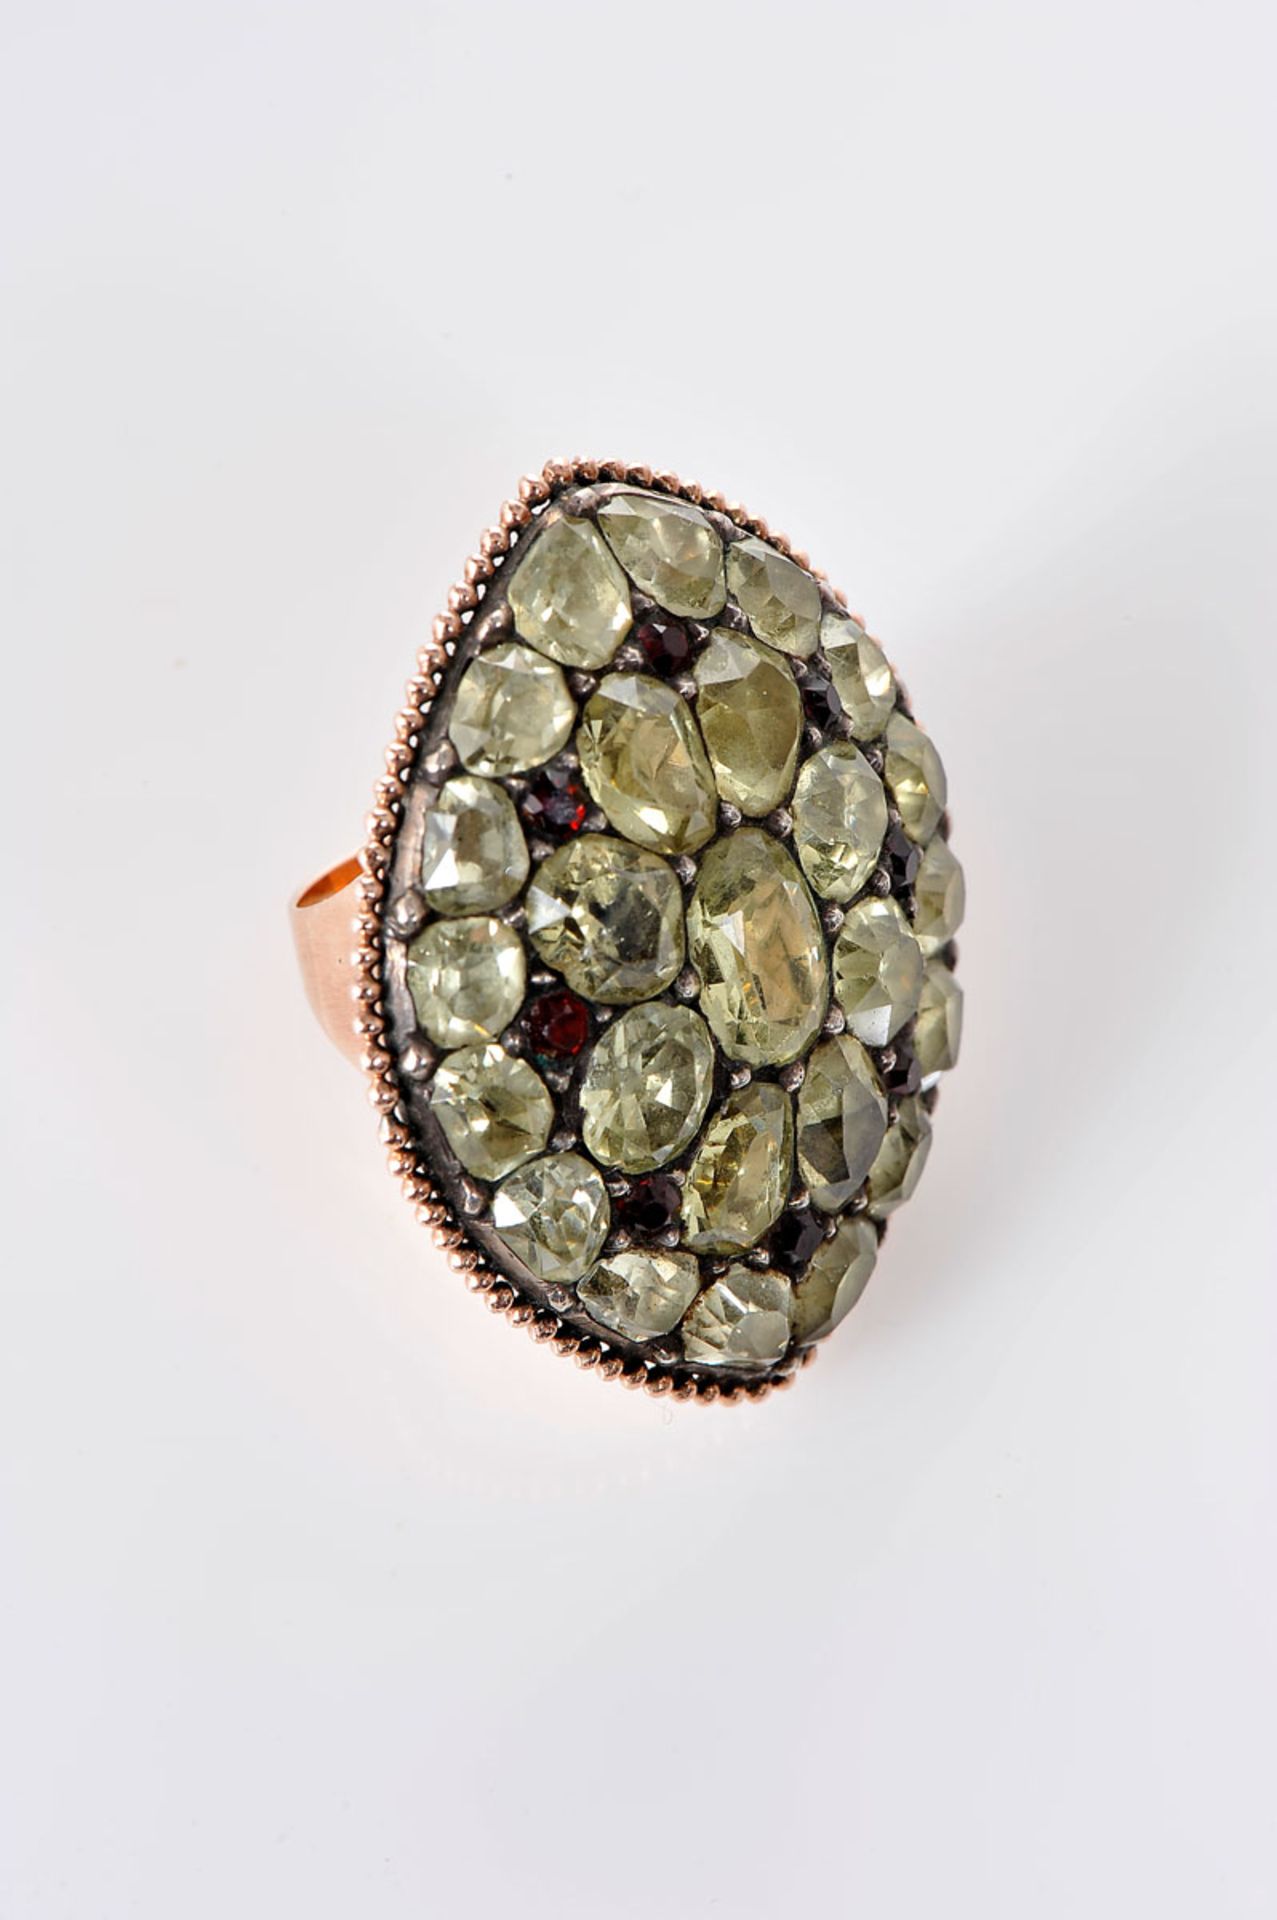 A Ring, gold, set with garnets and chrysolites (chrysoberyls), Portuguese, 19th C. (1st half),